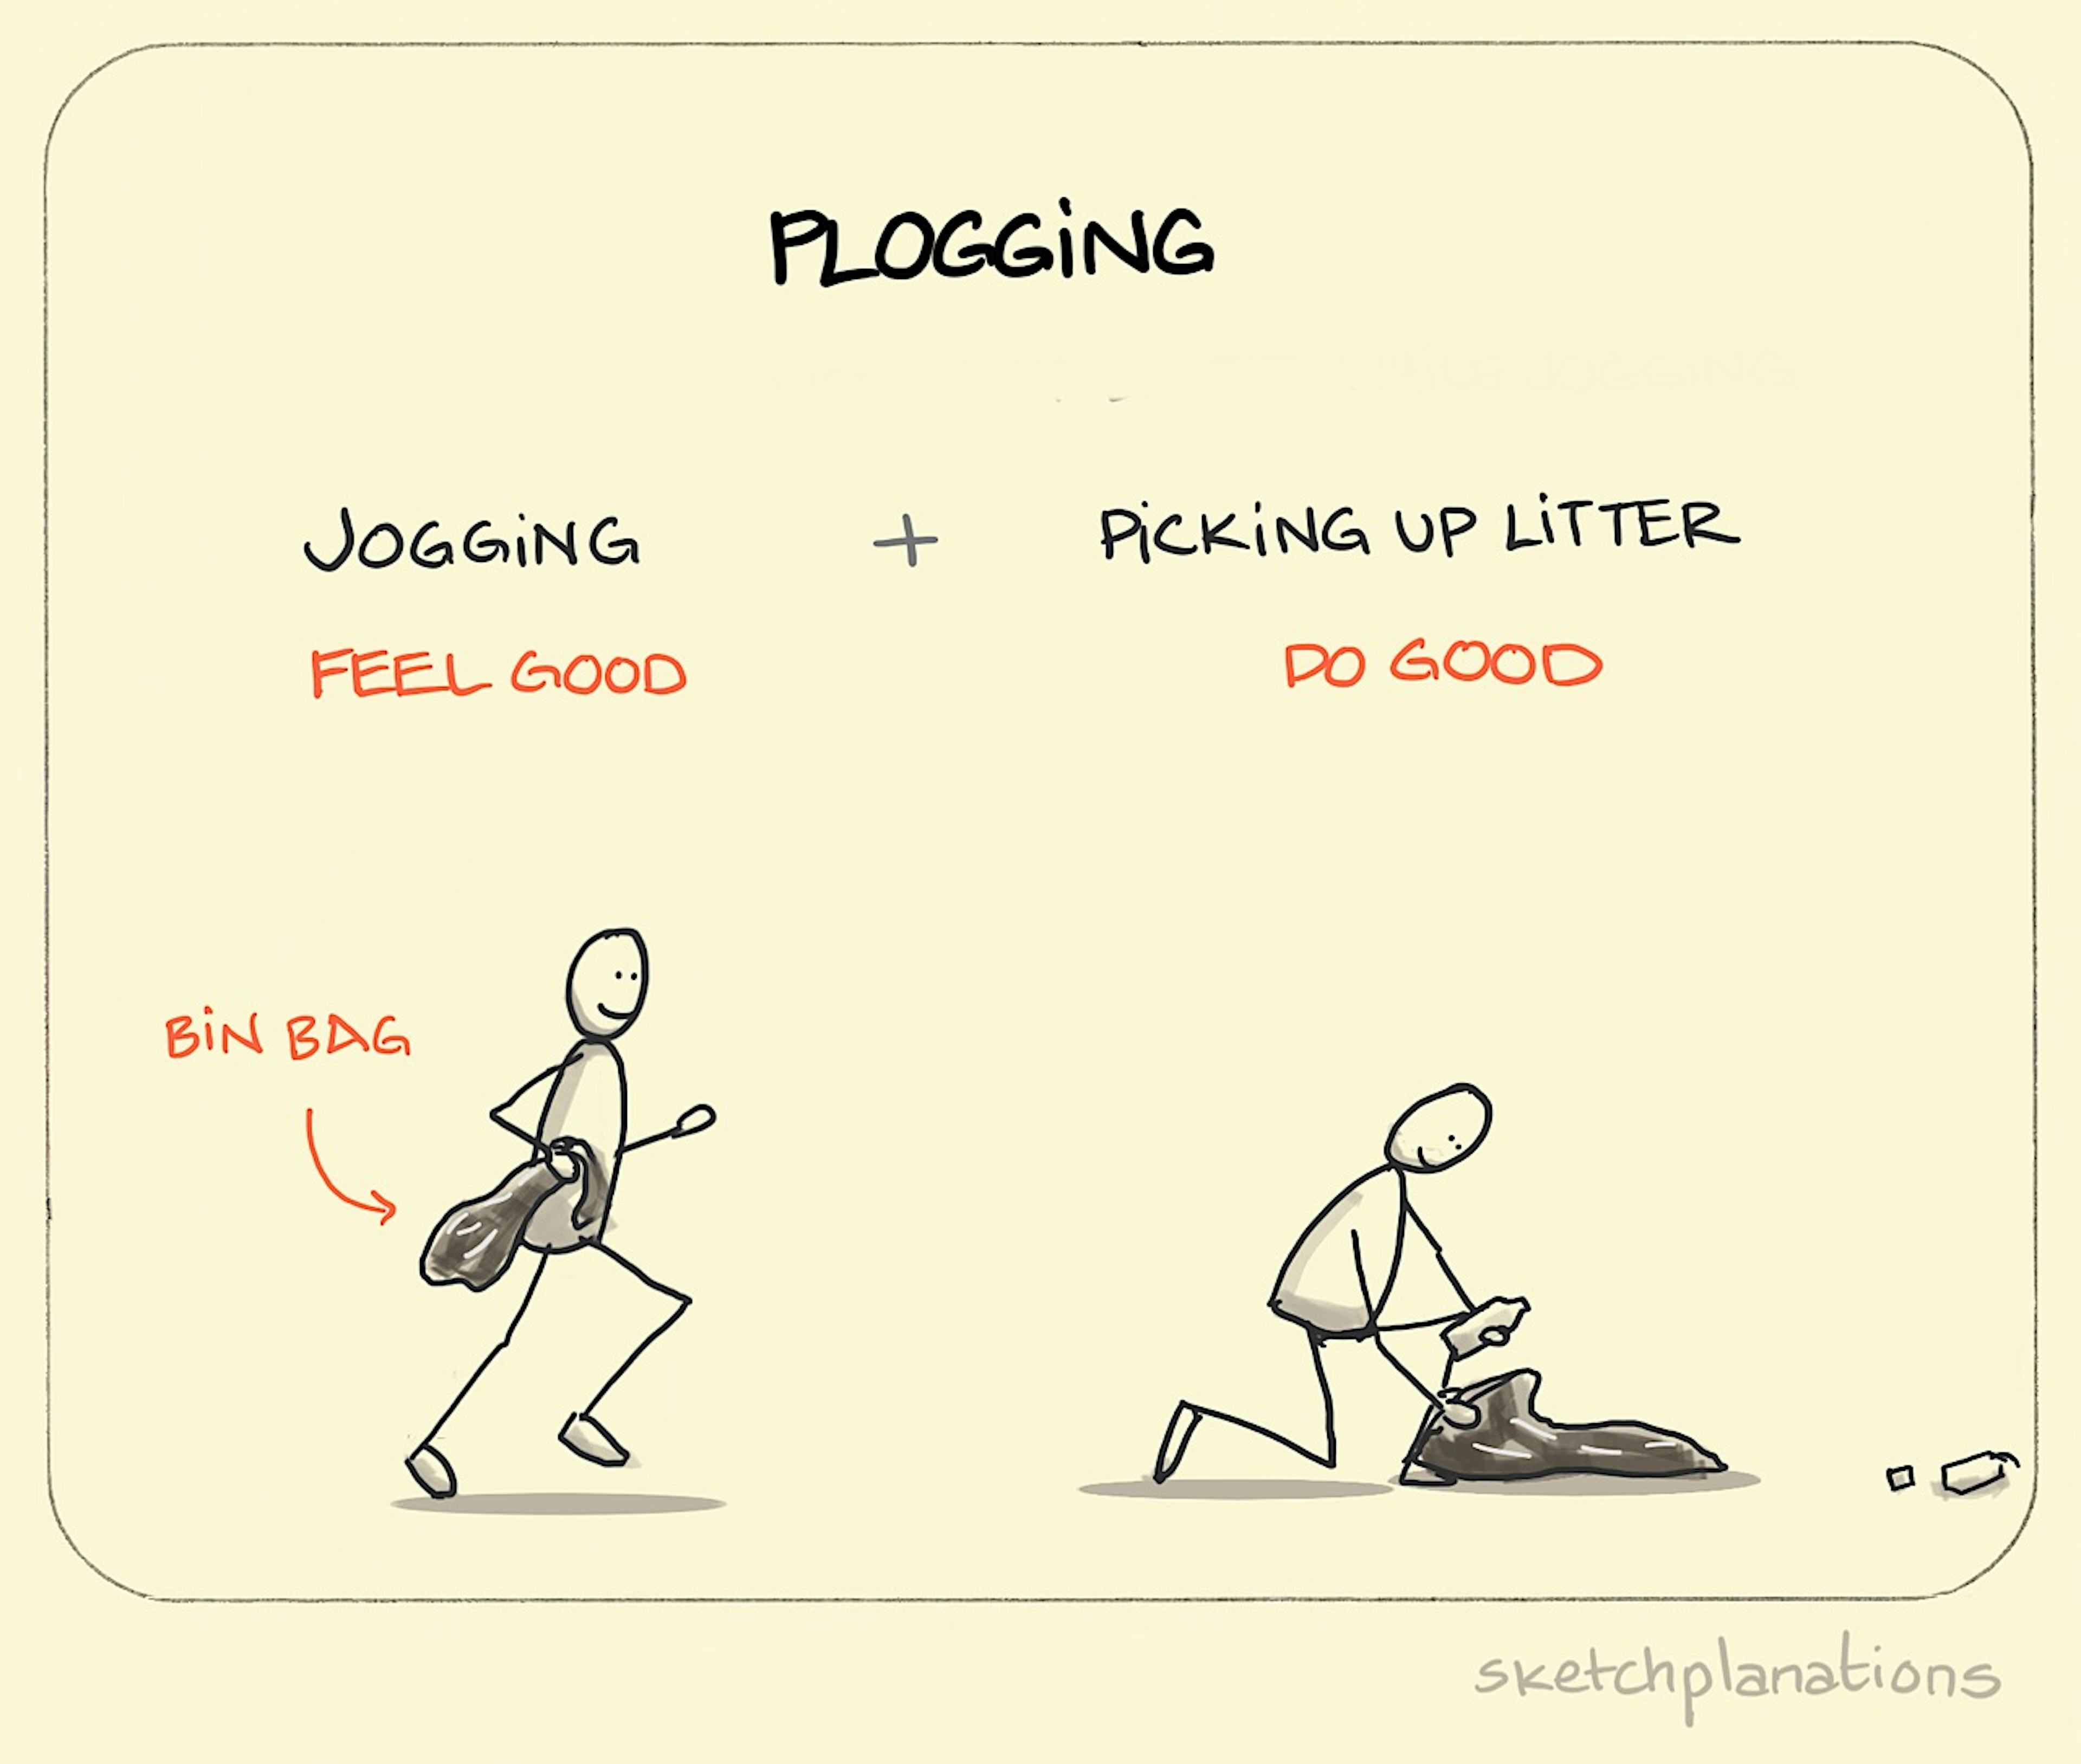 Plogging illustration: a happy jogger runs along with a bin bag in hand. Whenever they see litter, they stop to pick it up and pop it in the bag. 